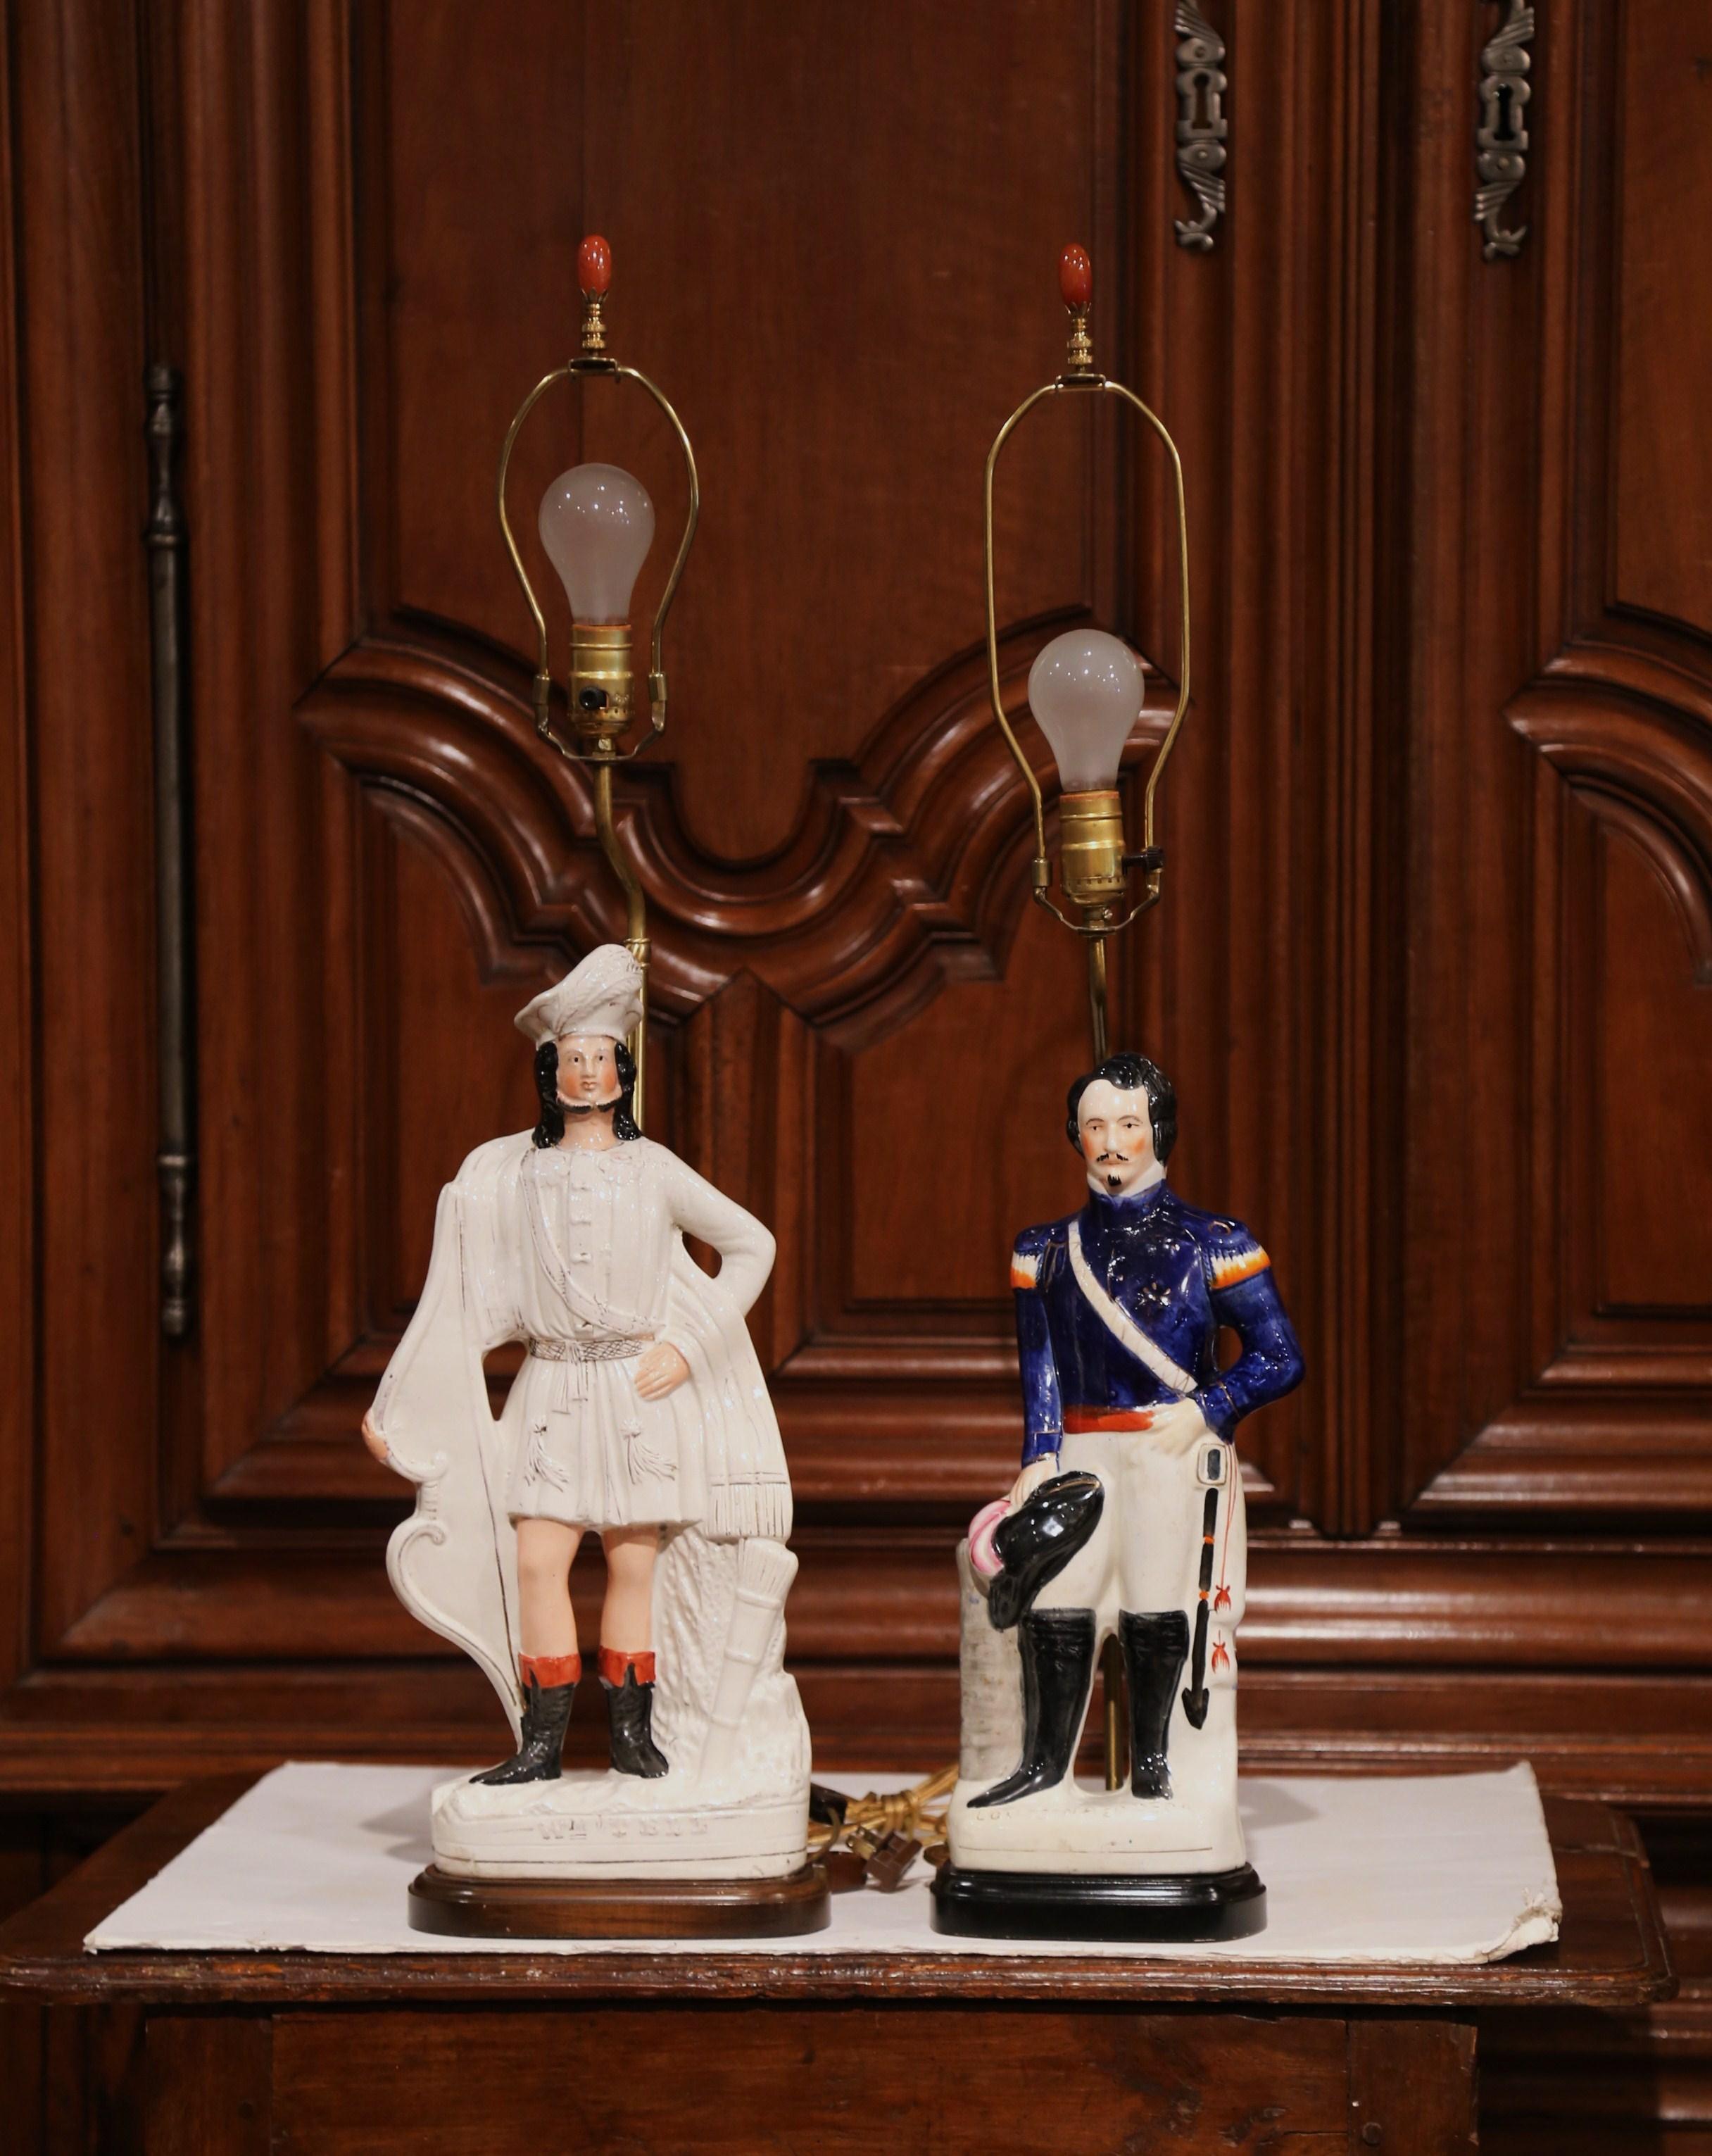 French Pair of 19th Century English Staffordshire Ceramic Figures Made into Table Lamps